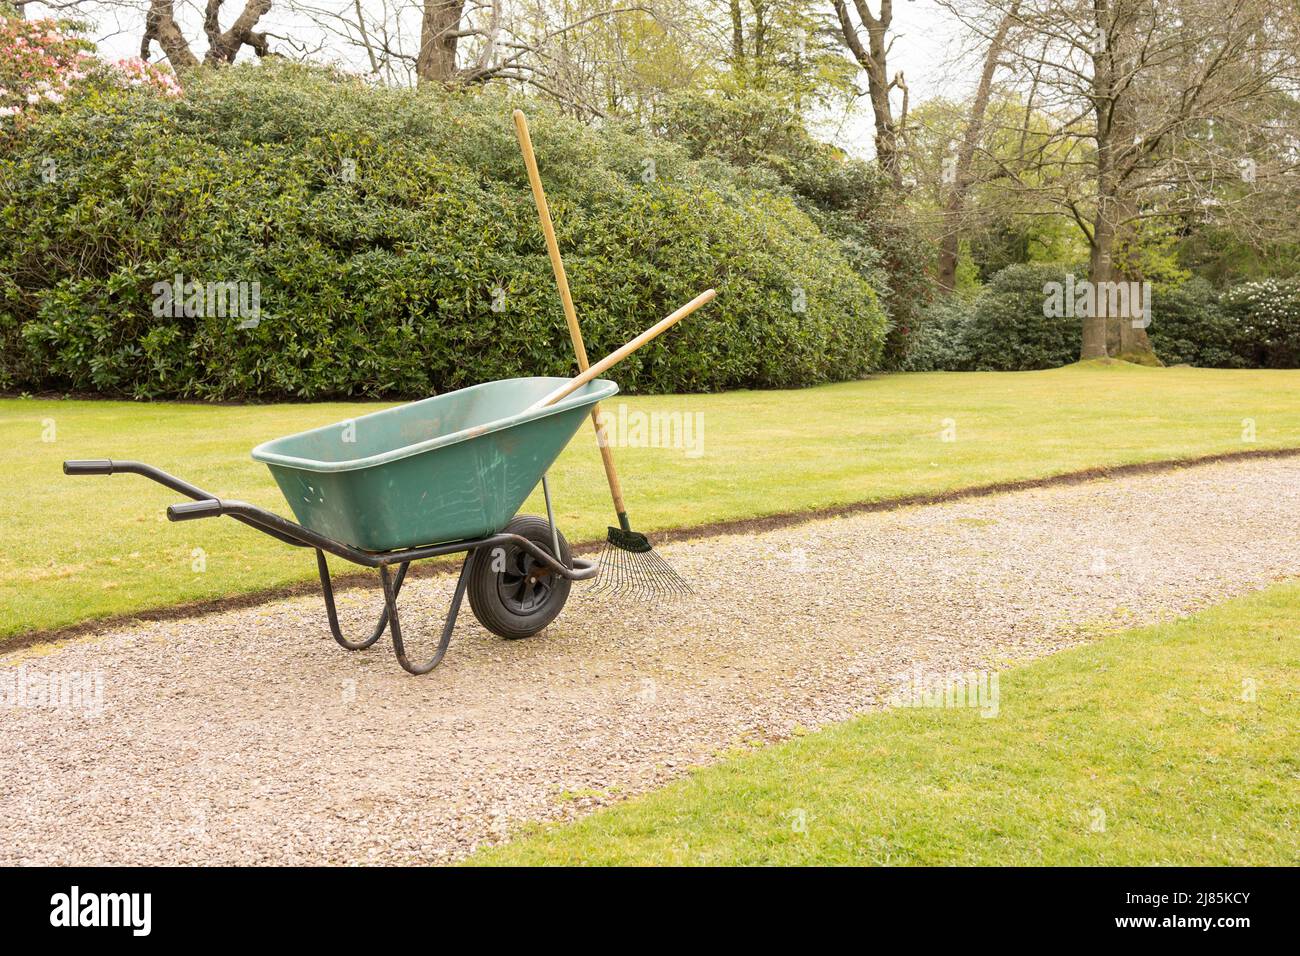 gardeners wheel barrow in green and tools on a gravel path and a well kept lawn Stock Photo